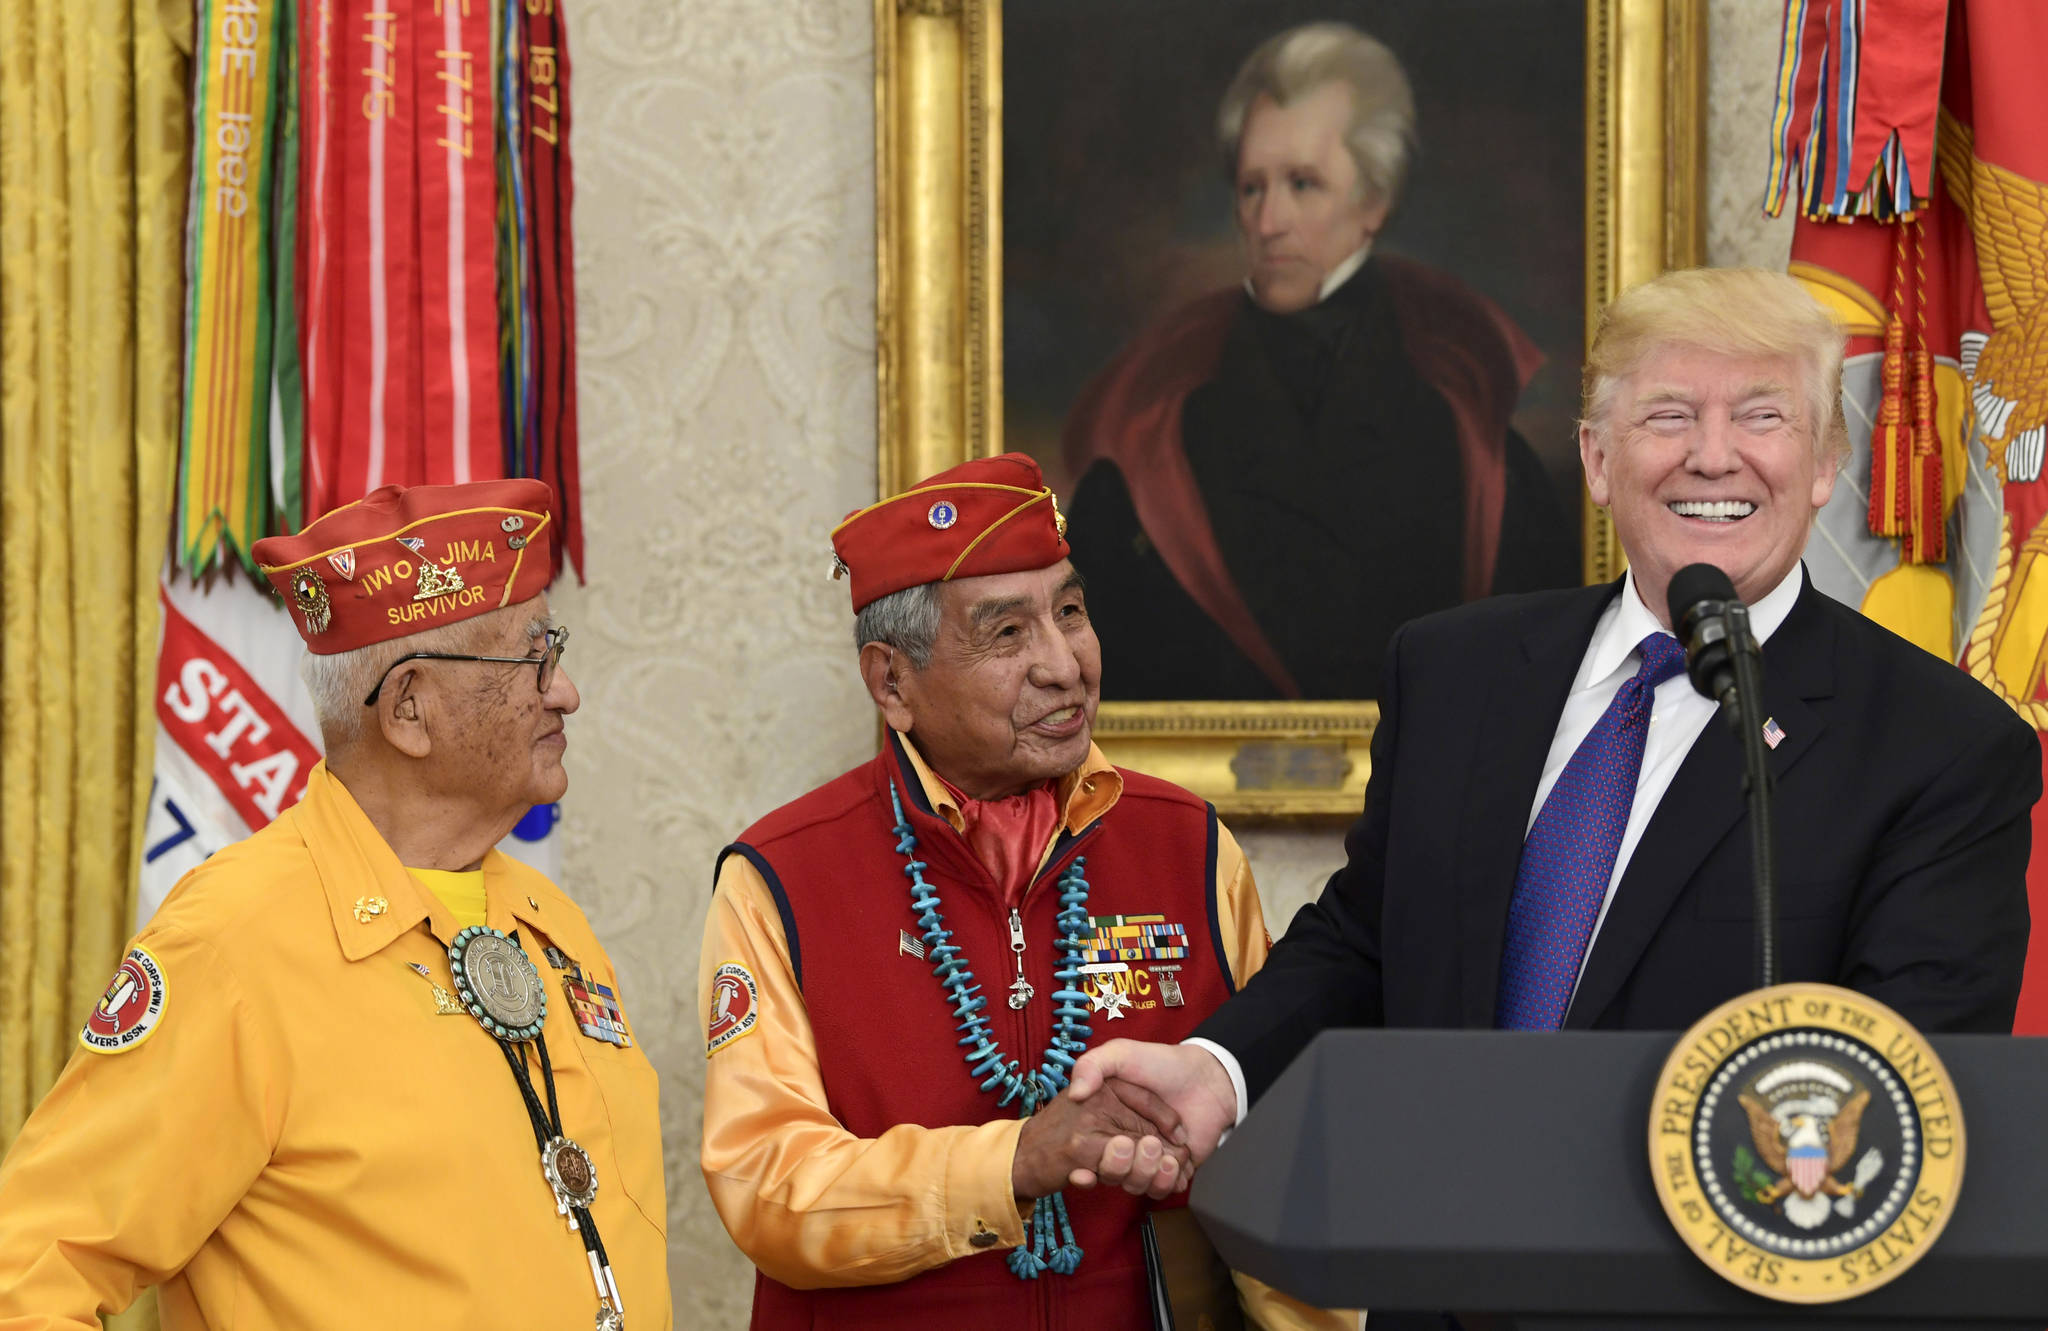 President Donald Trump, right, meets with Navajo Code Talkers Peter MacDonald, center, and Thomas Begay, left, in the Oval Office of the White House in Washington, Monday, Nov. 27, 2017. (Susan Walsh | The Associated Press)